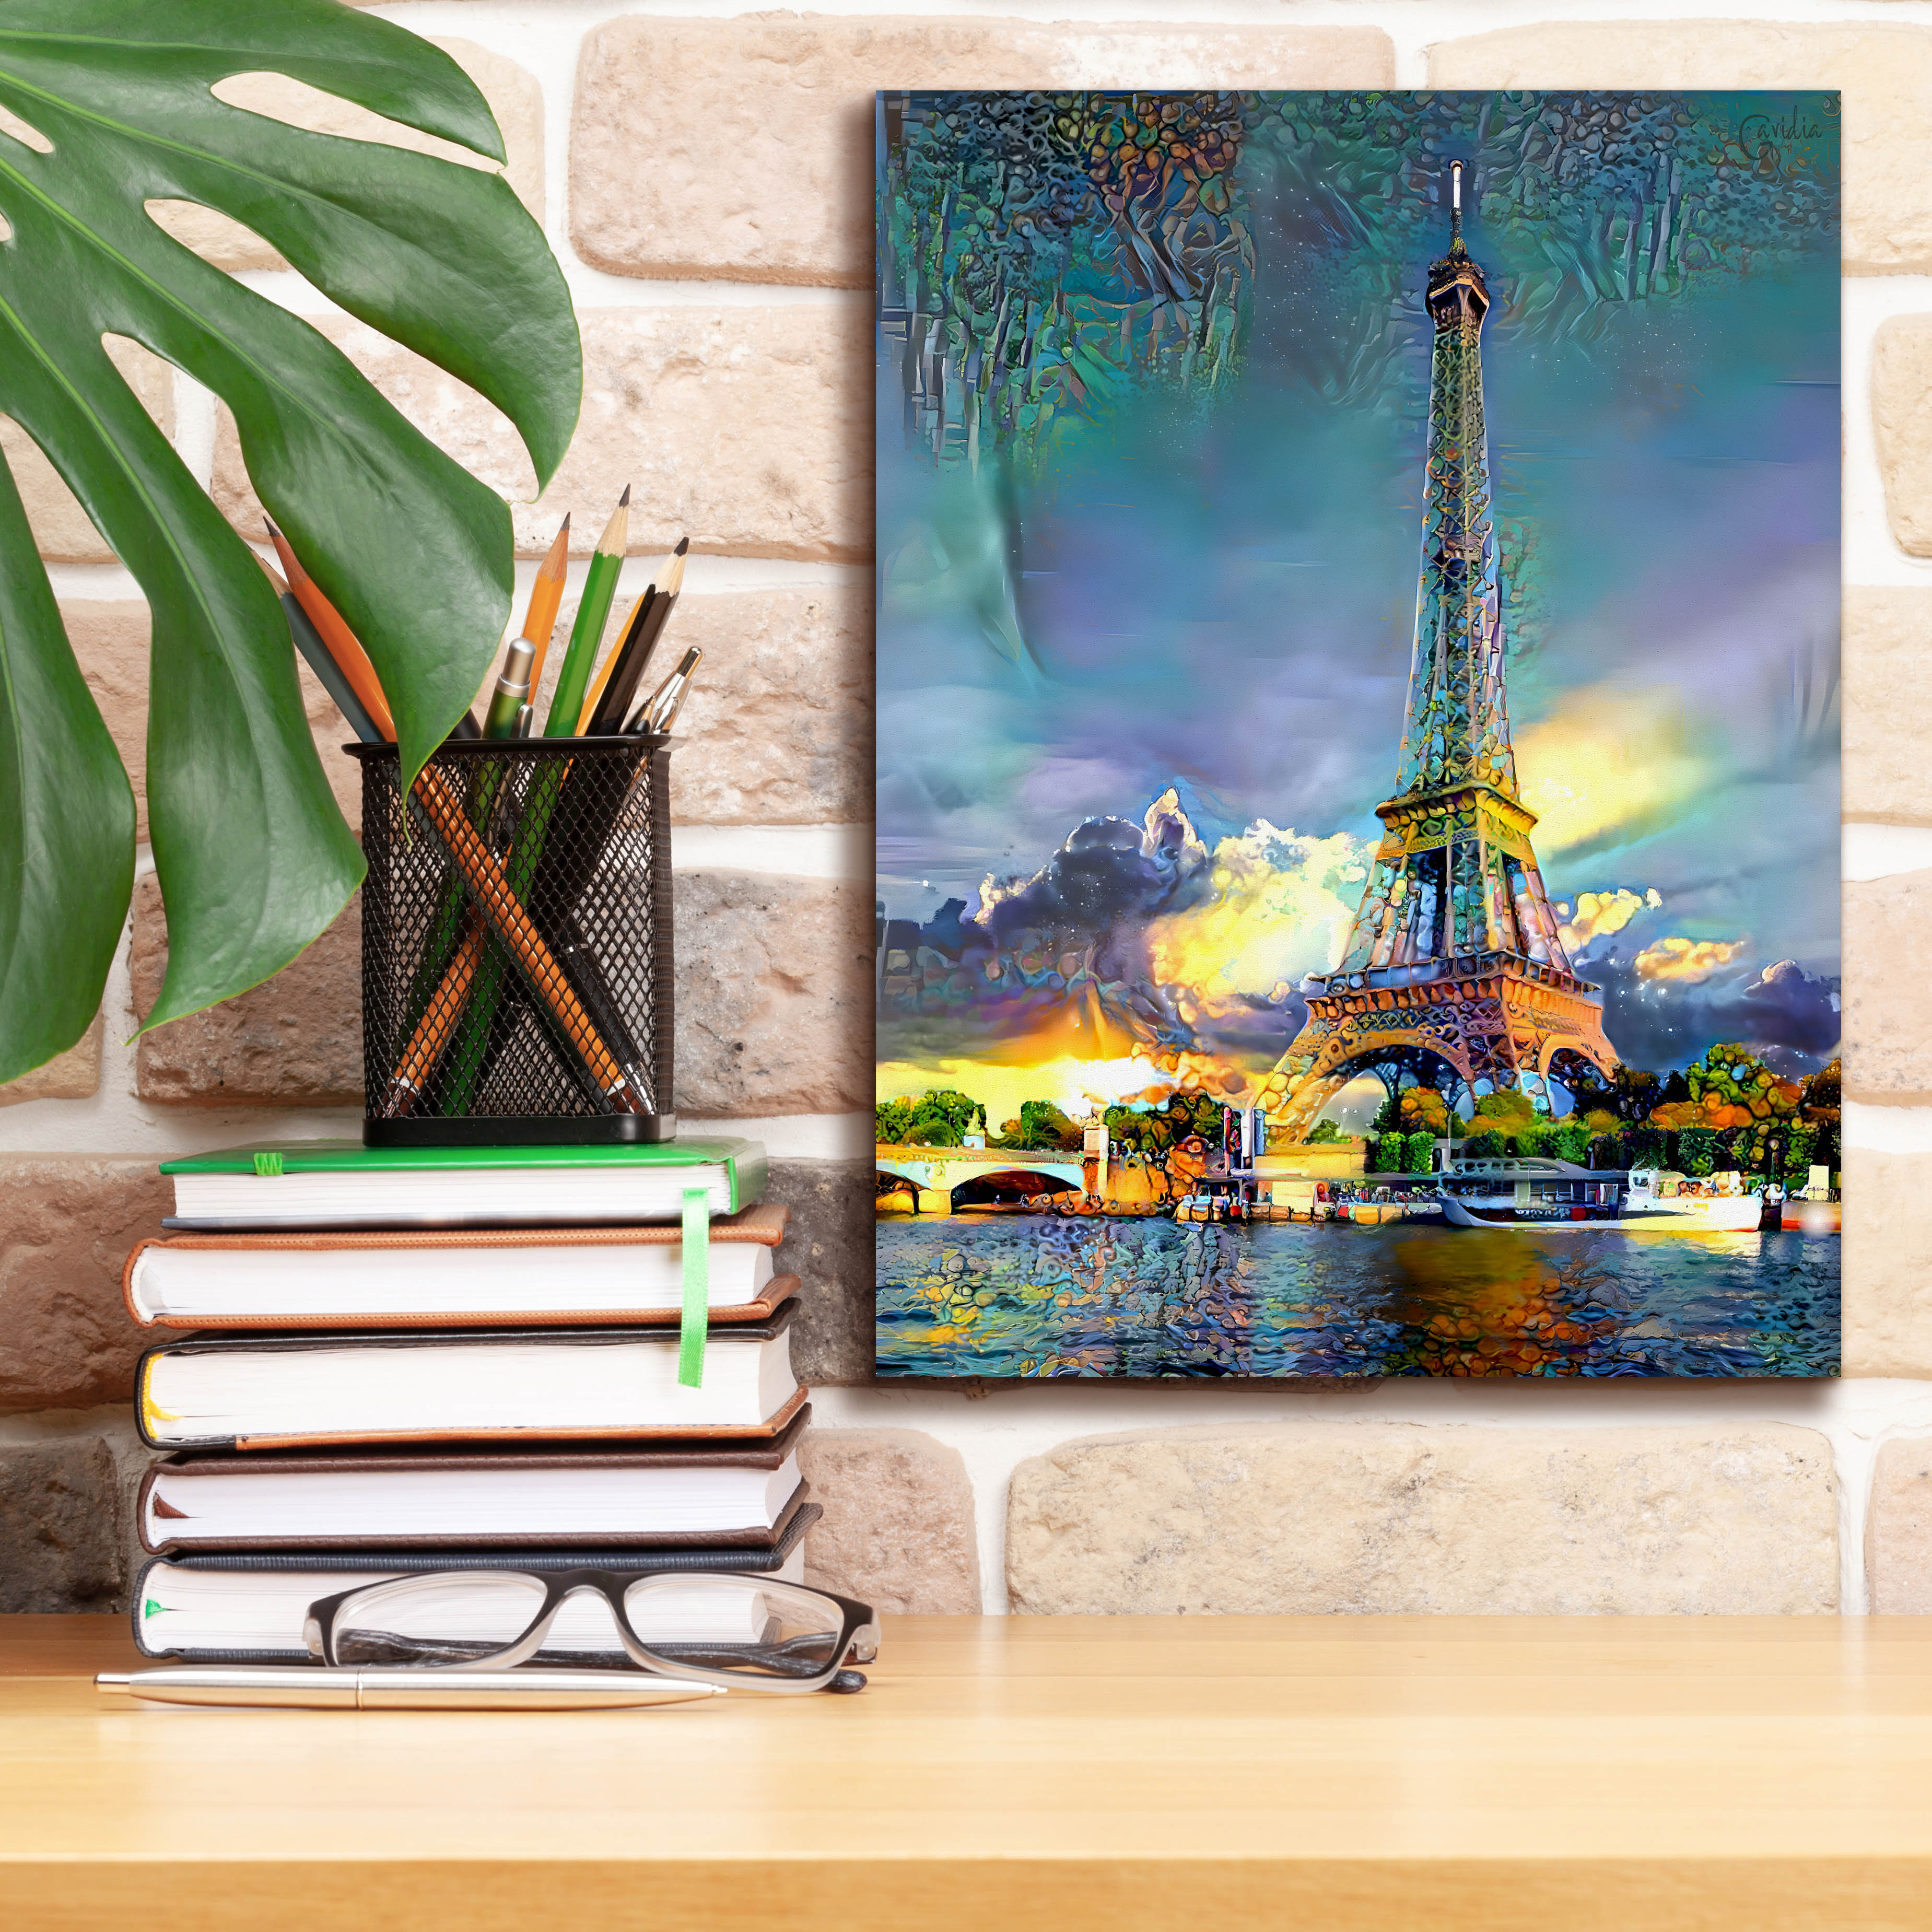 abstract eiffel tower painting